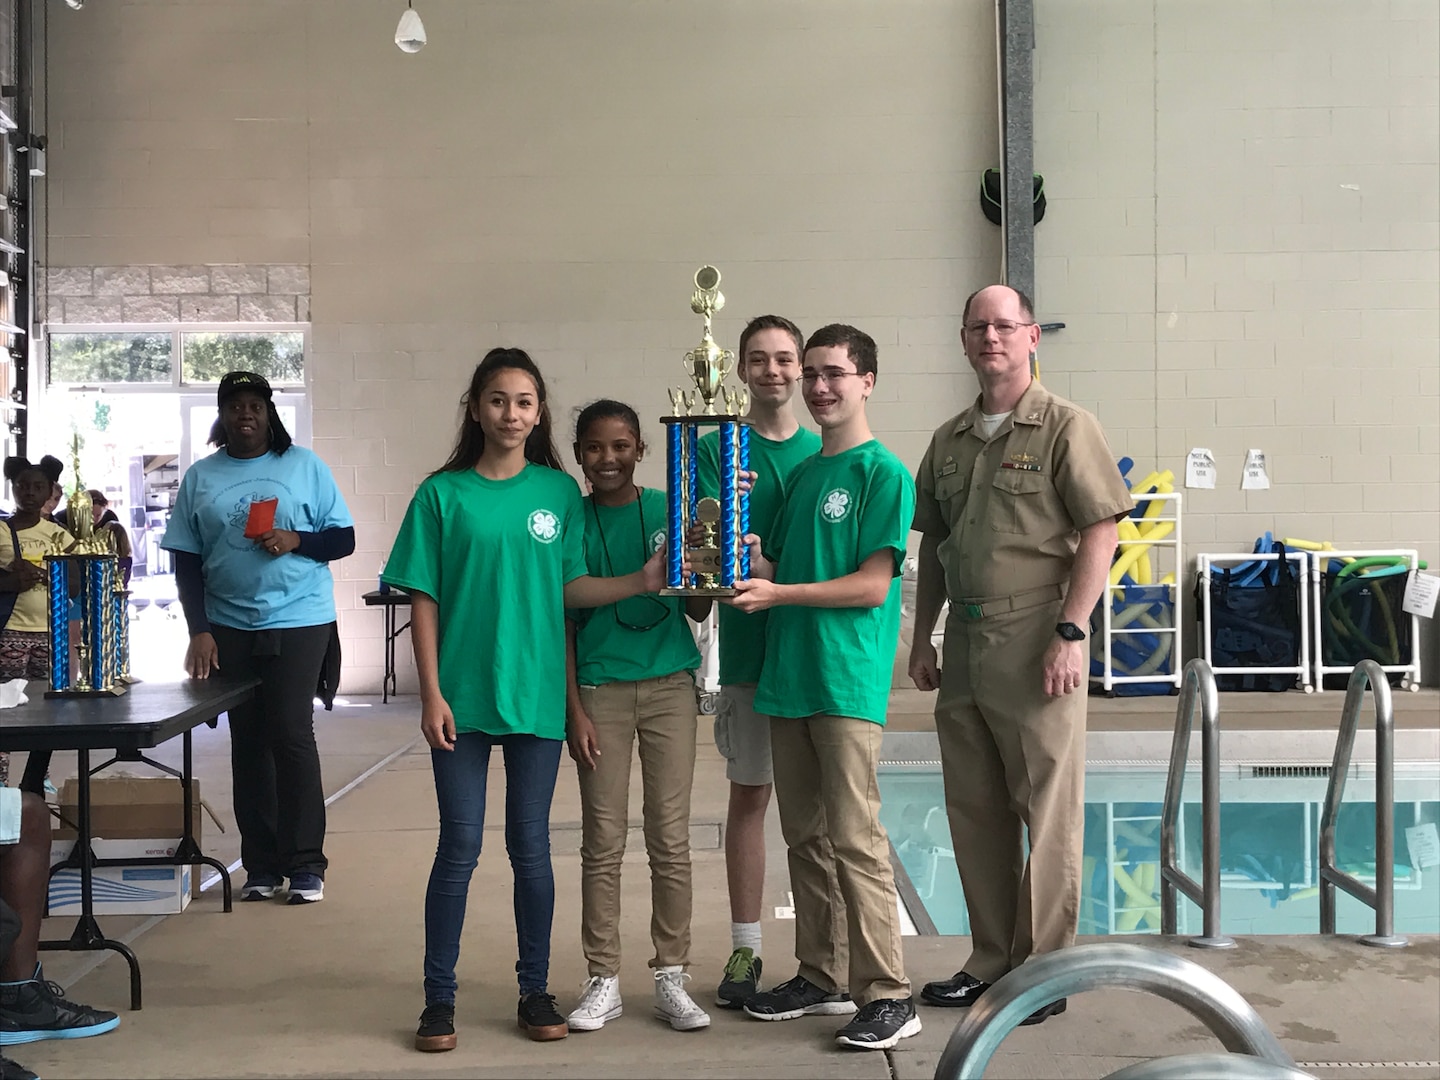 SERMC Commanding Officer, Capt. Dave Gombas, (right) stands with the winning middle school team from Mayport Coastal Sciences Middle School. Students participating in SeaPerch learn important engineering and design skills while exploring naval architecture and ocean engineering principles.